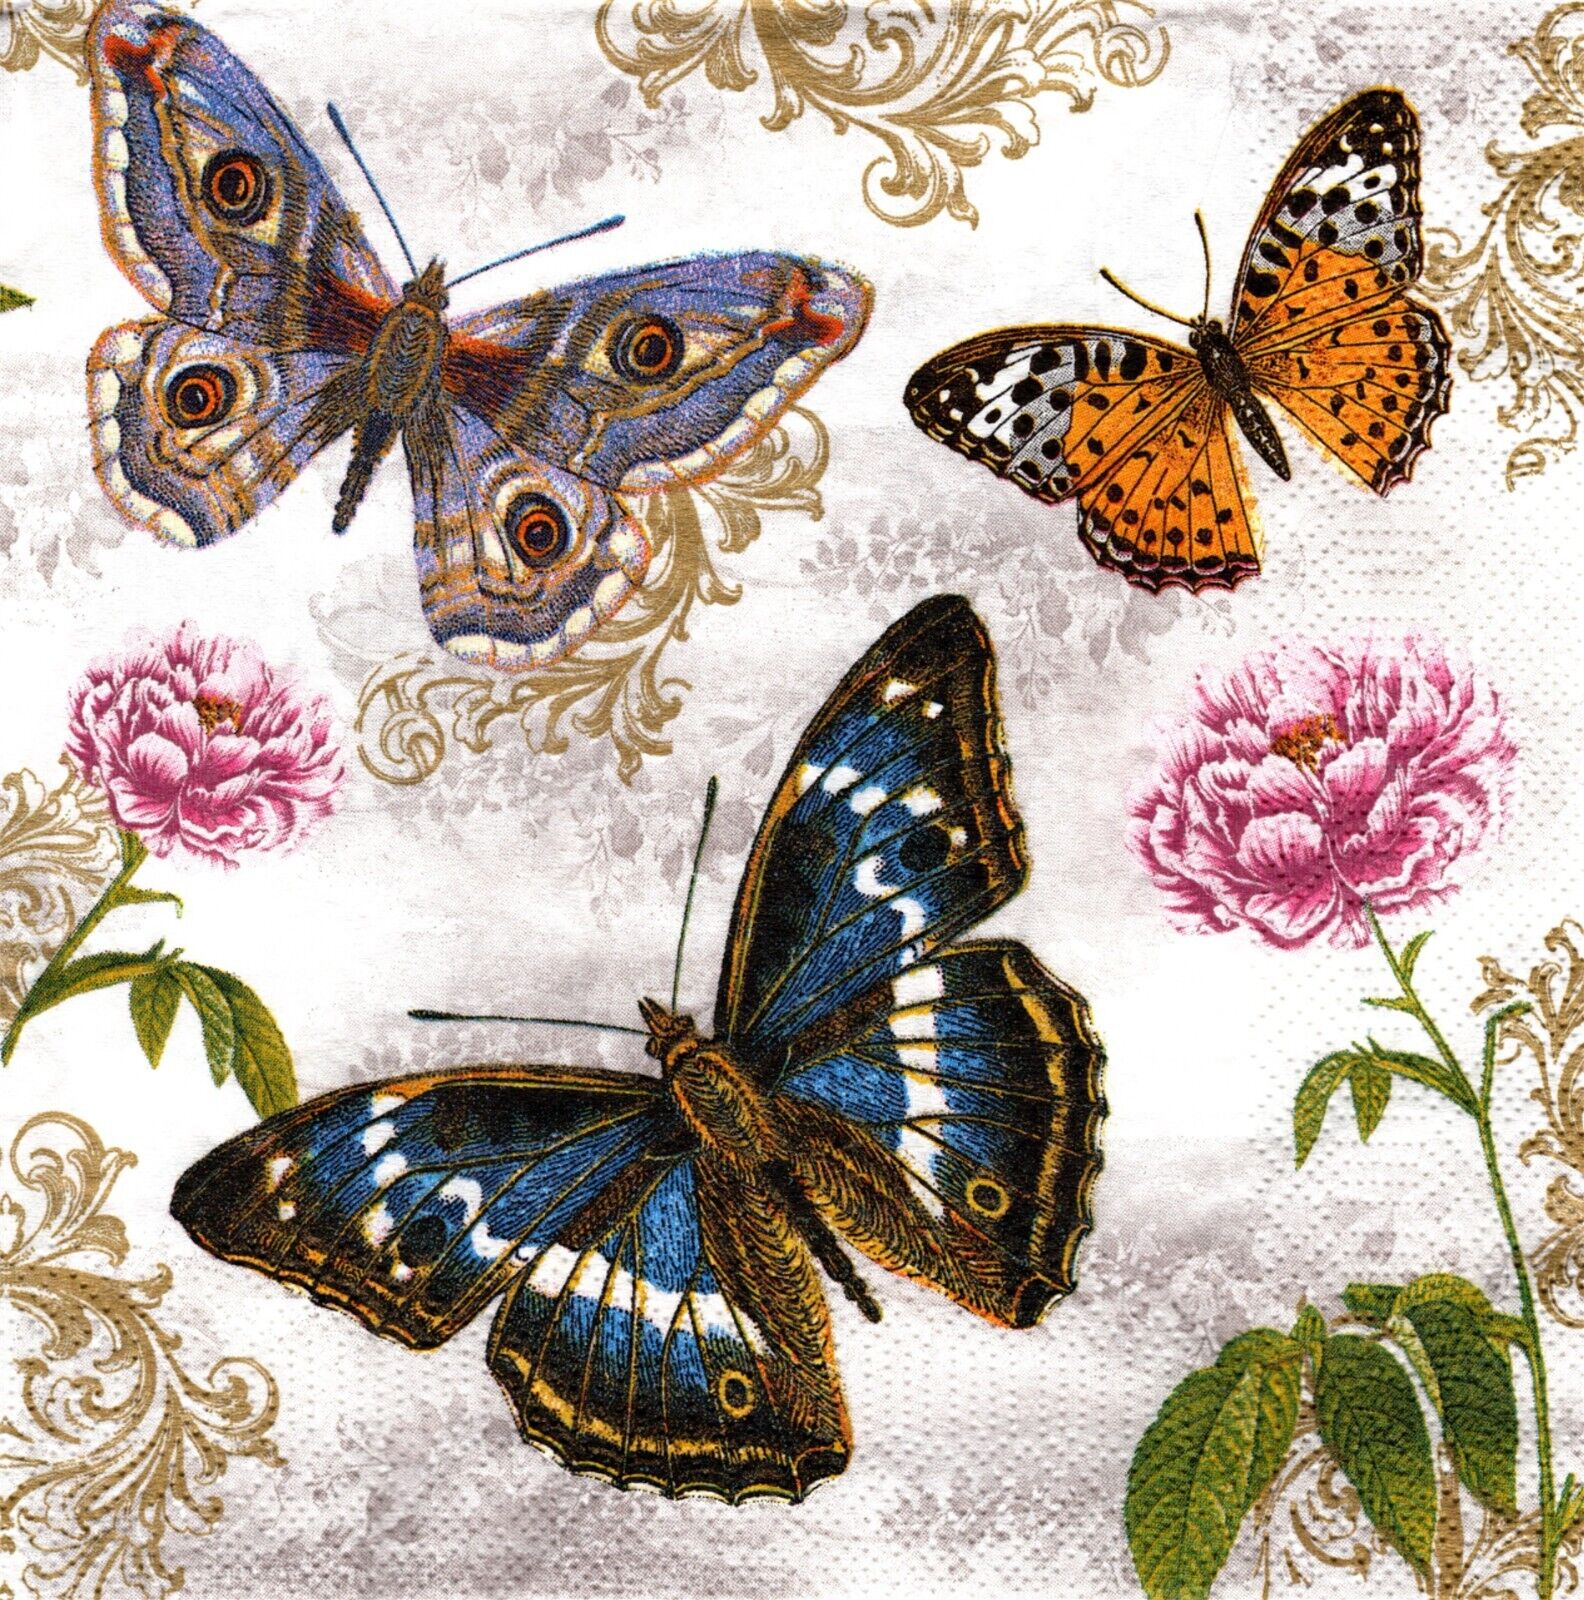 (2) Two Paper Lunch Napkins for Decoupage/Mixed Media - Butterflies on Retro